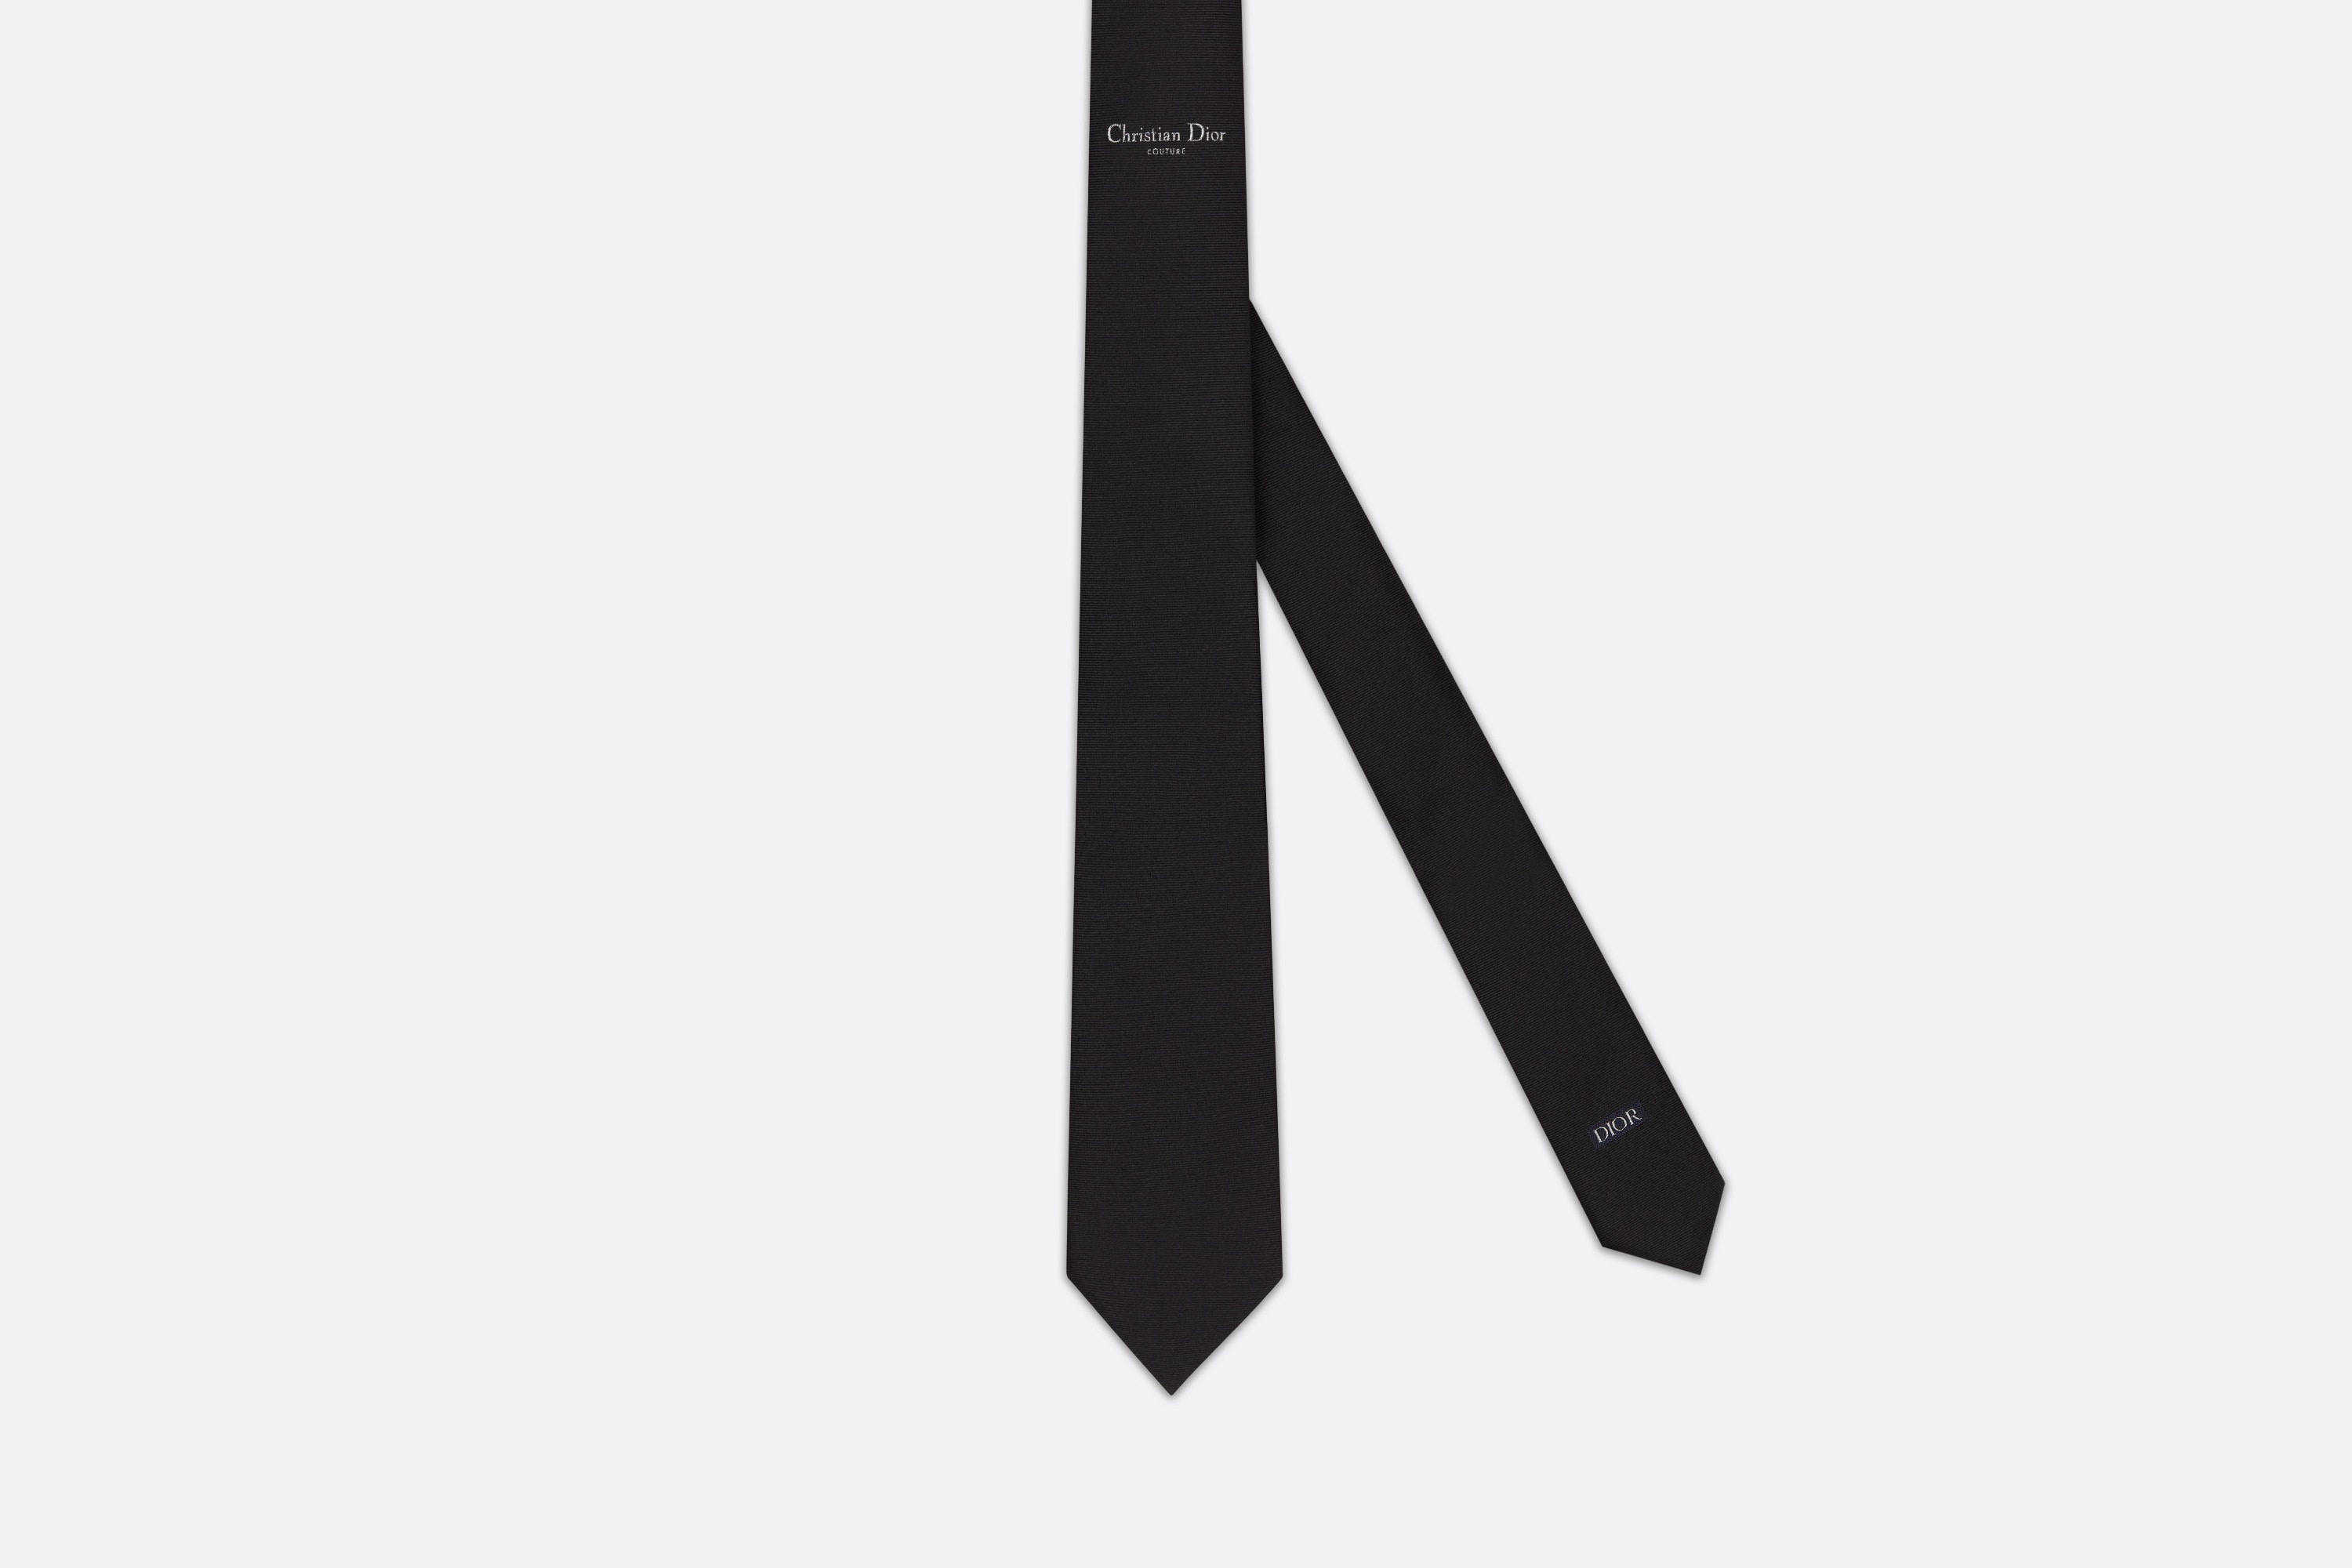 'Christian Dior COUTURE' Tie - 1